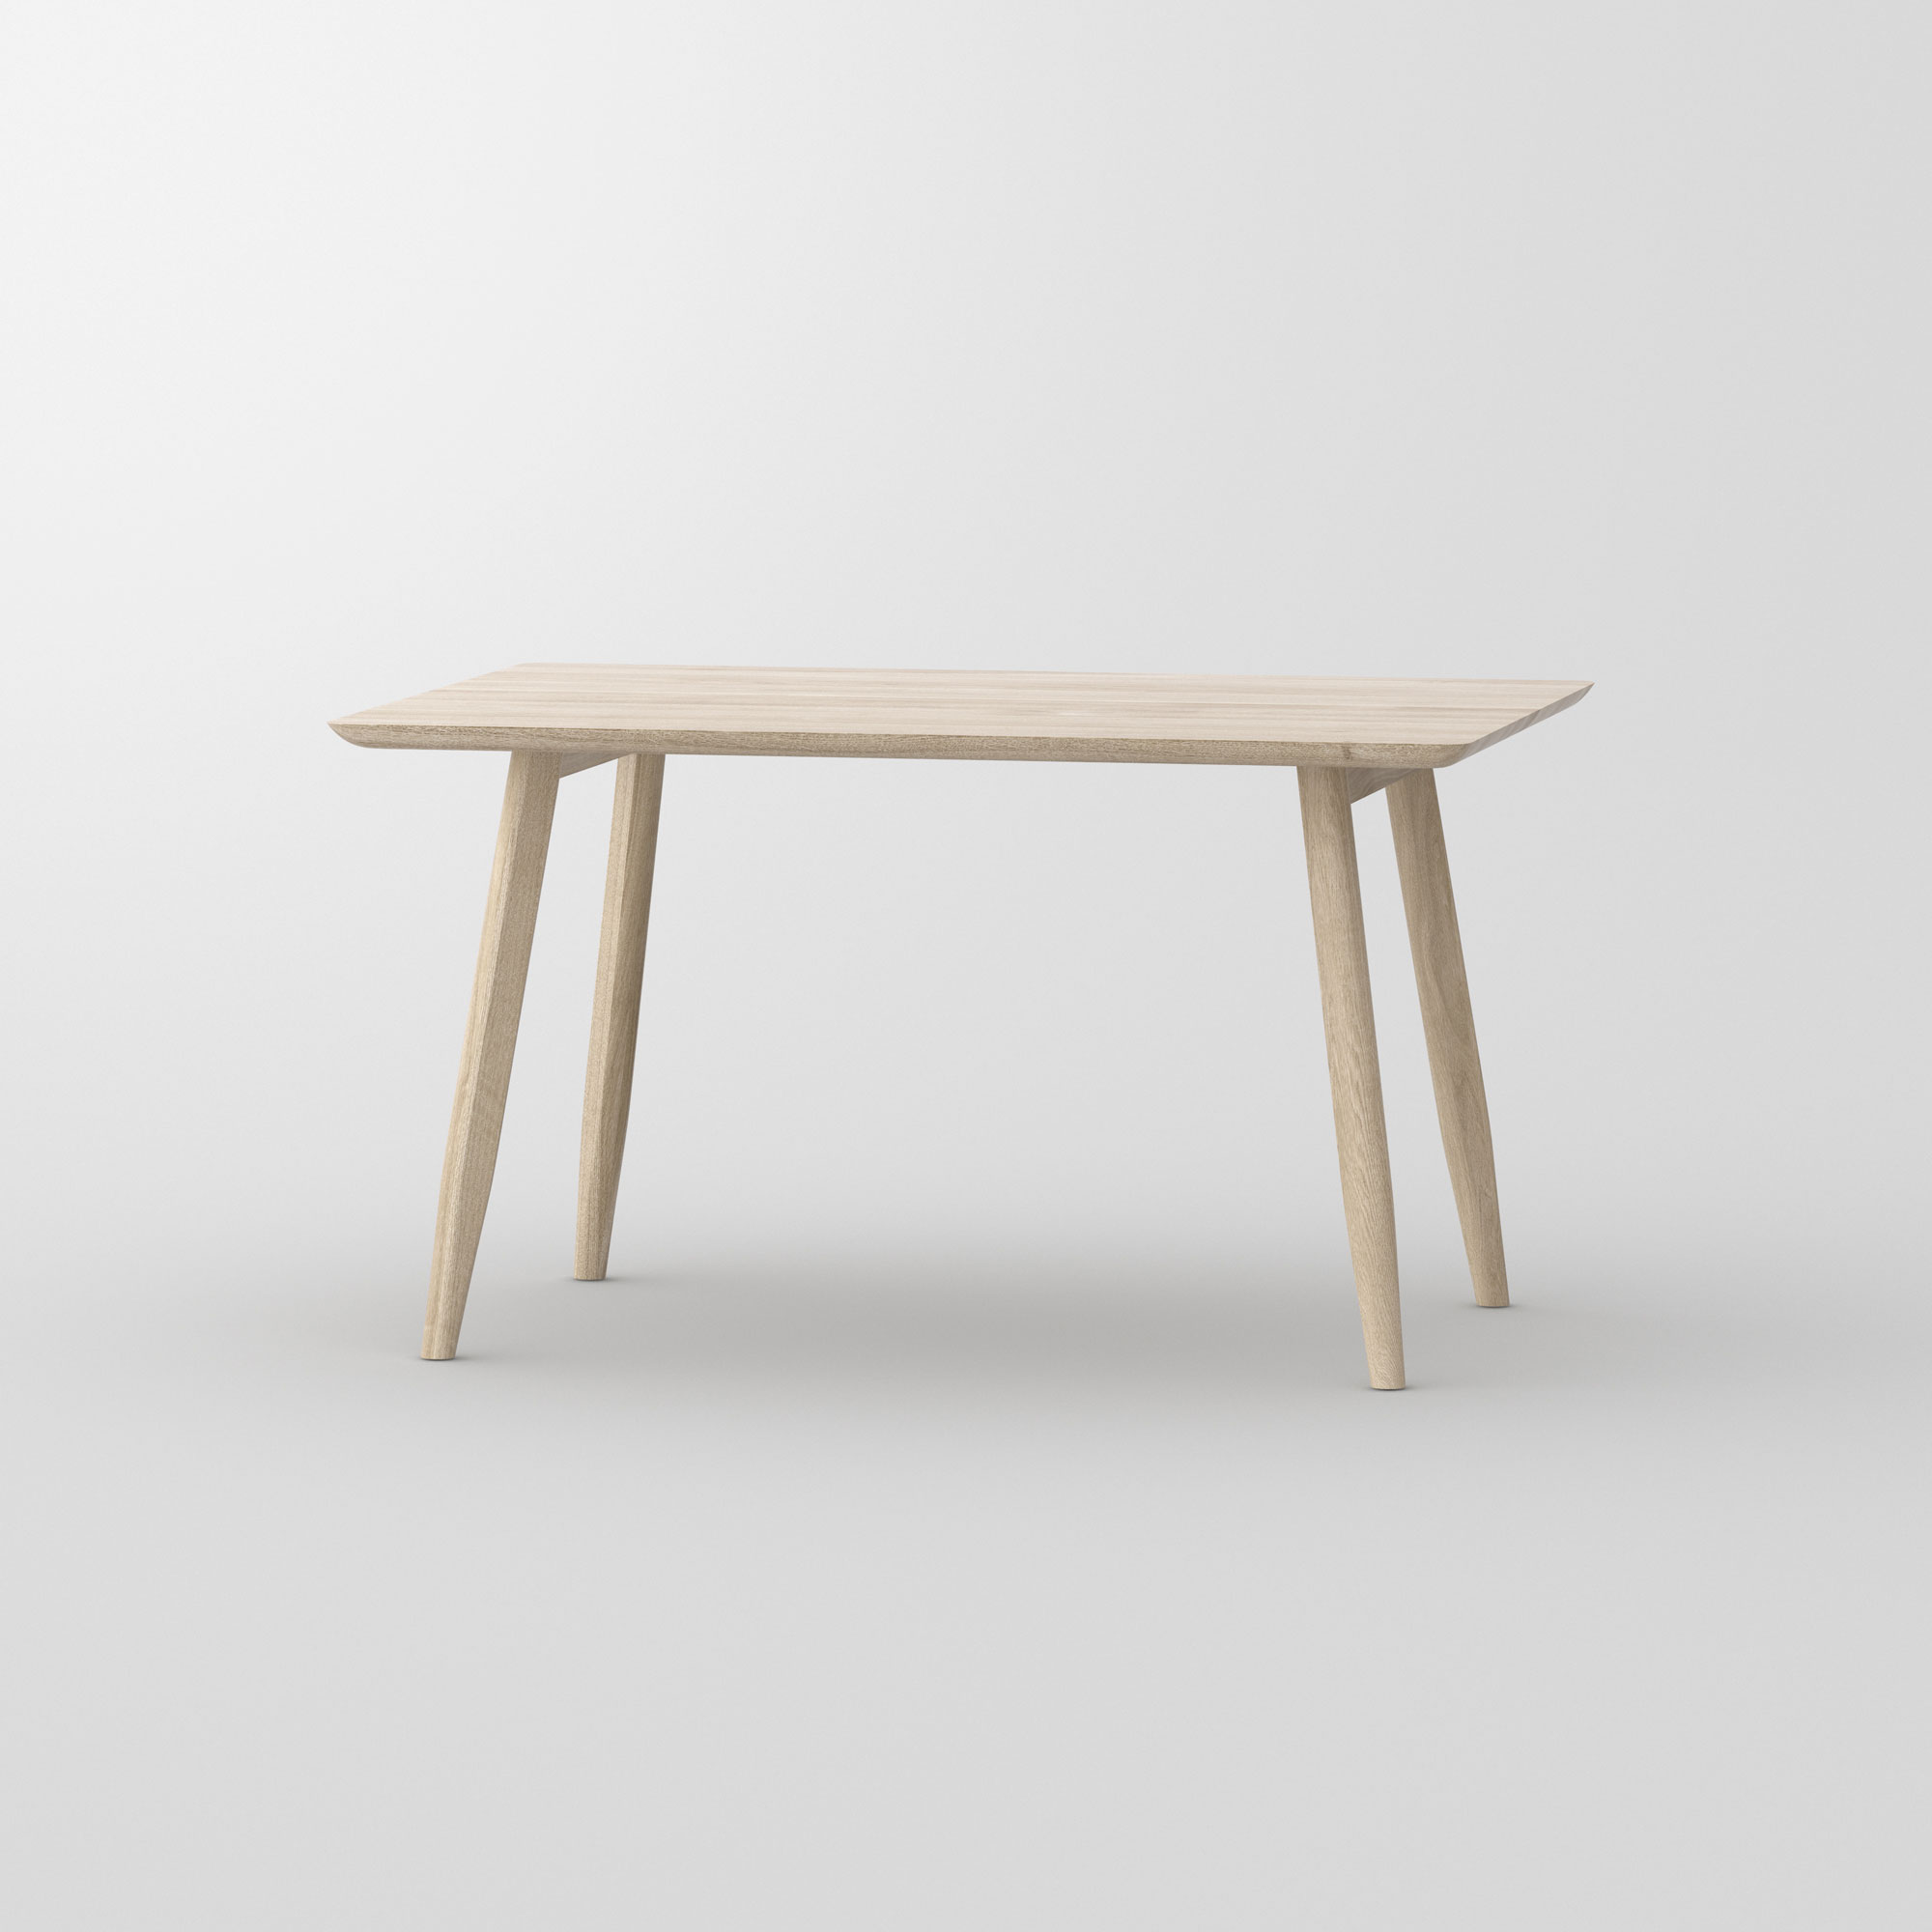 Designer Dining Table Wood AETAS BASIC 3 cam2 custom made in solid wood by vitamin design